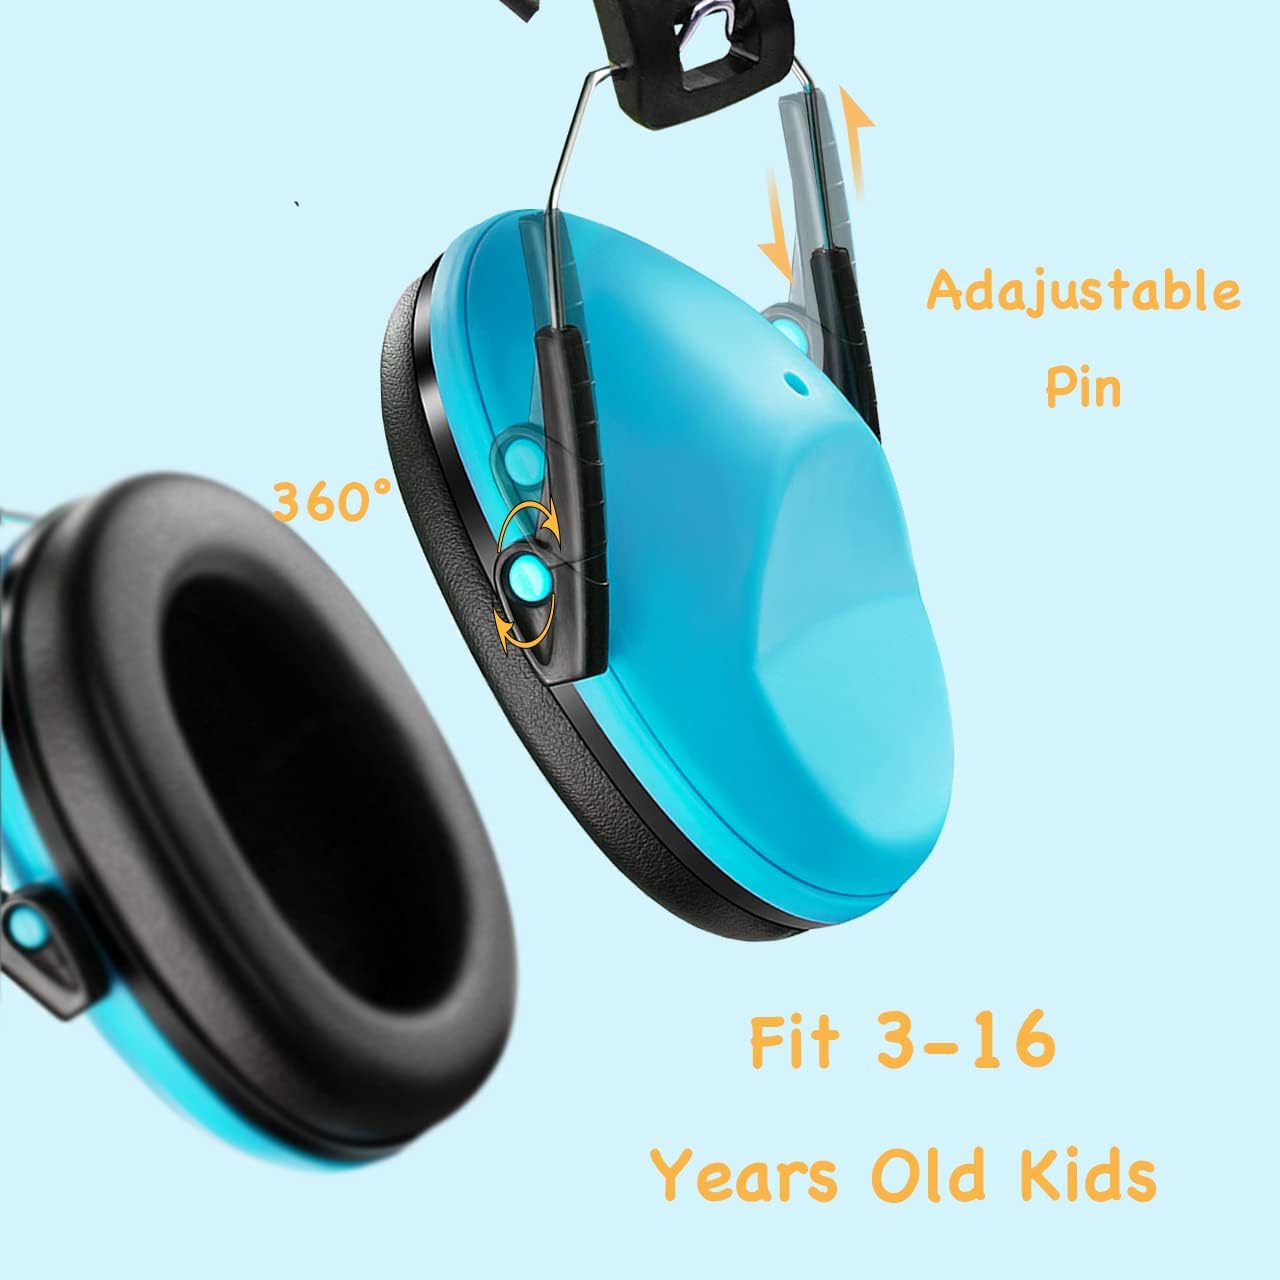 Generic Noise Cancelling Headphones for Kids, Toddler Kid Ear Protection 26dB, Adjustable Noise Cancelling Ear Muffs for 3-16 Years, Ea